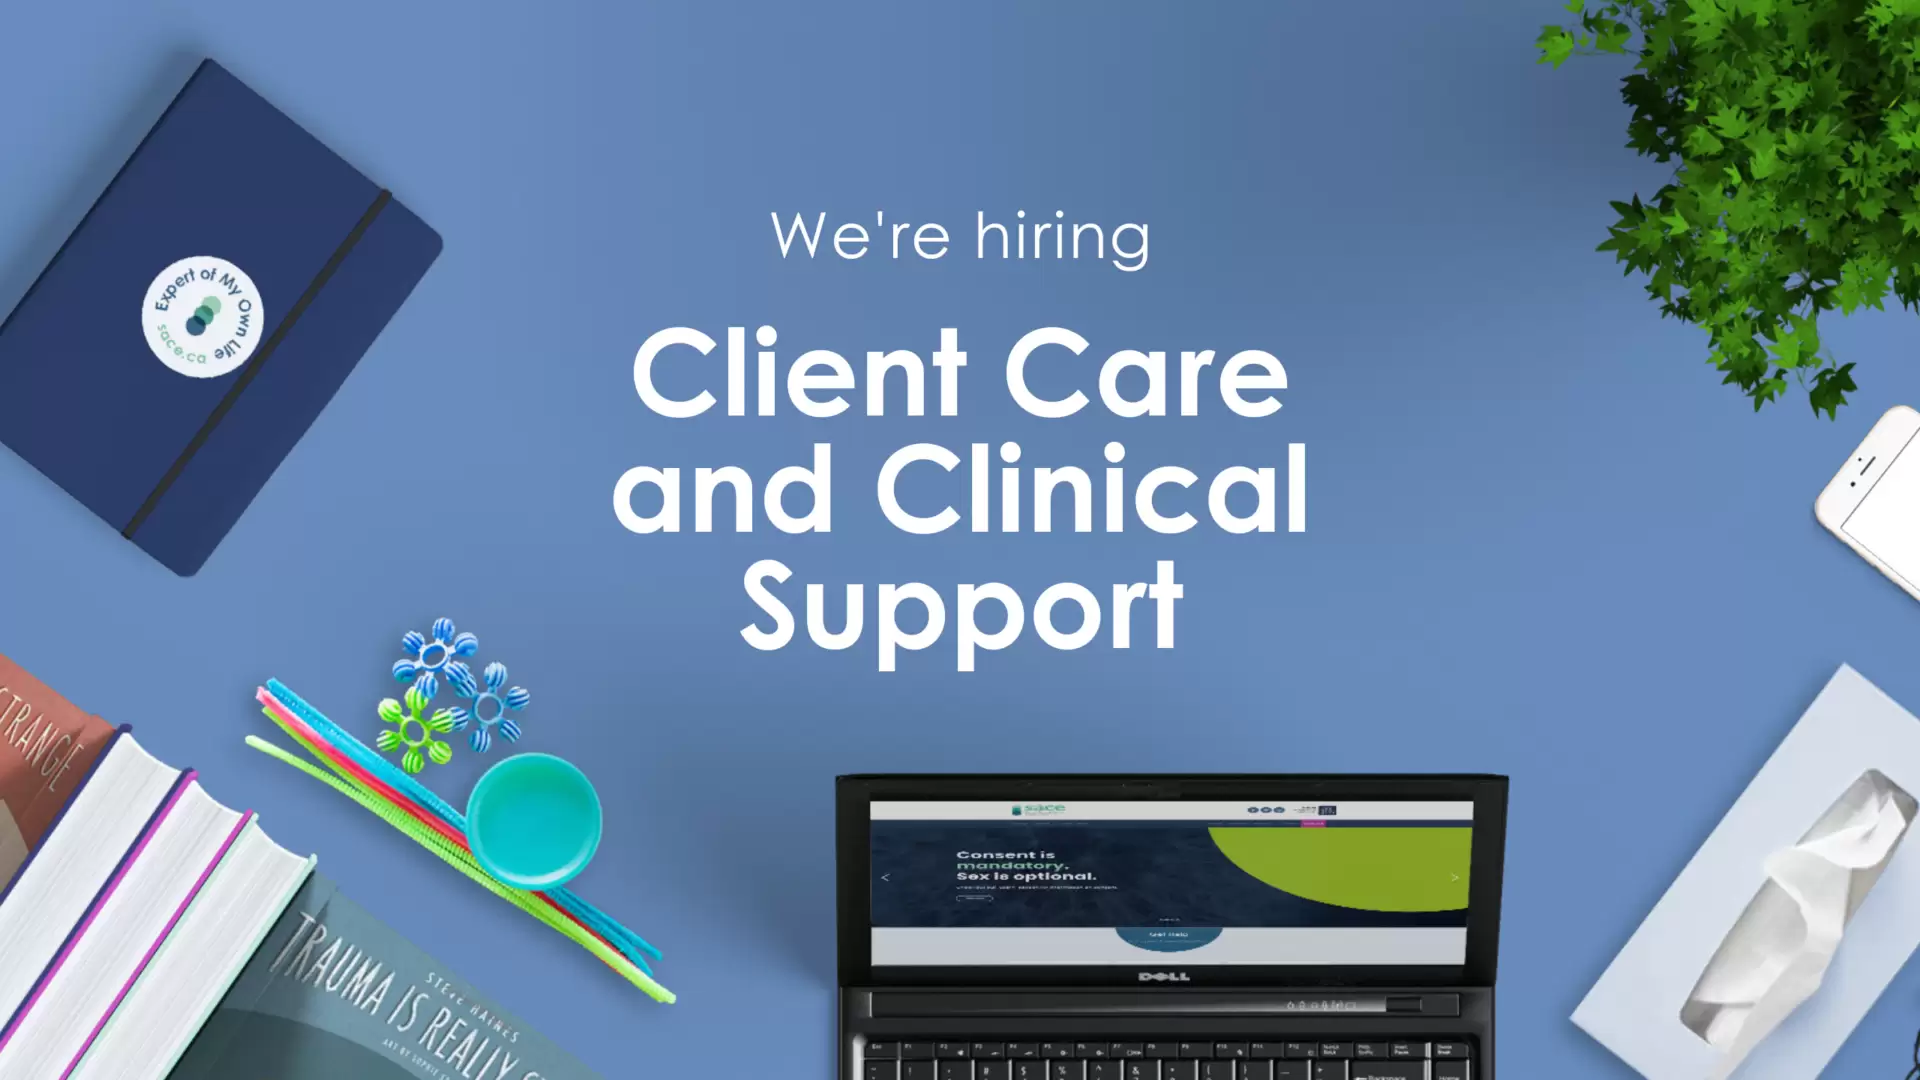 Blue background with SACE notebook, books, fidget toys, laptop, tissue box, cellphone, a green plant, and text that says "We're hiring Client Care and Clinical Support"